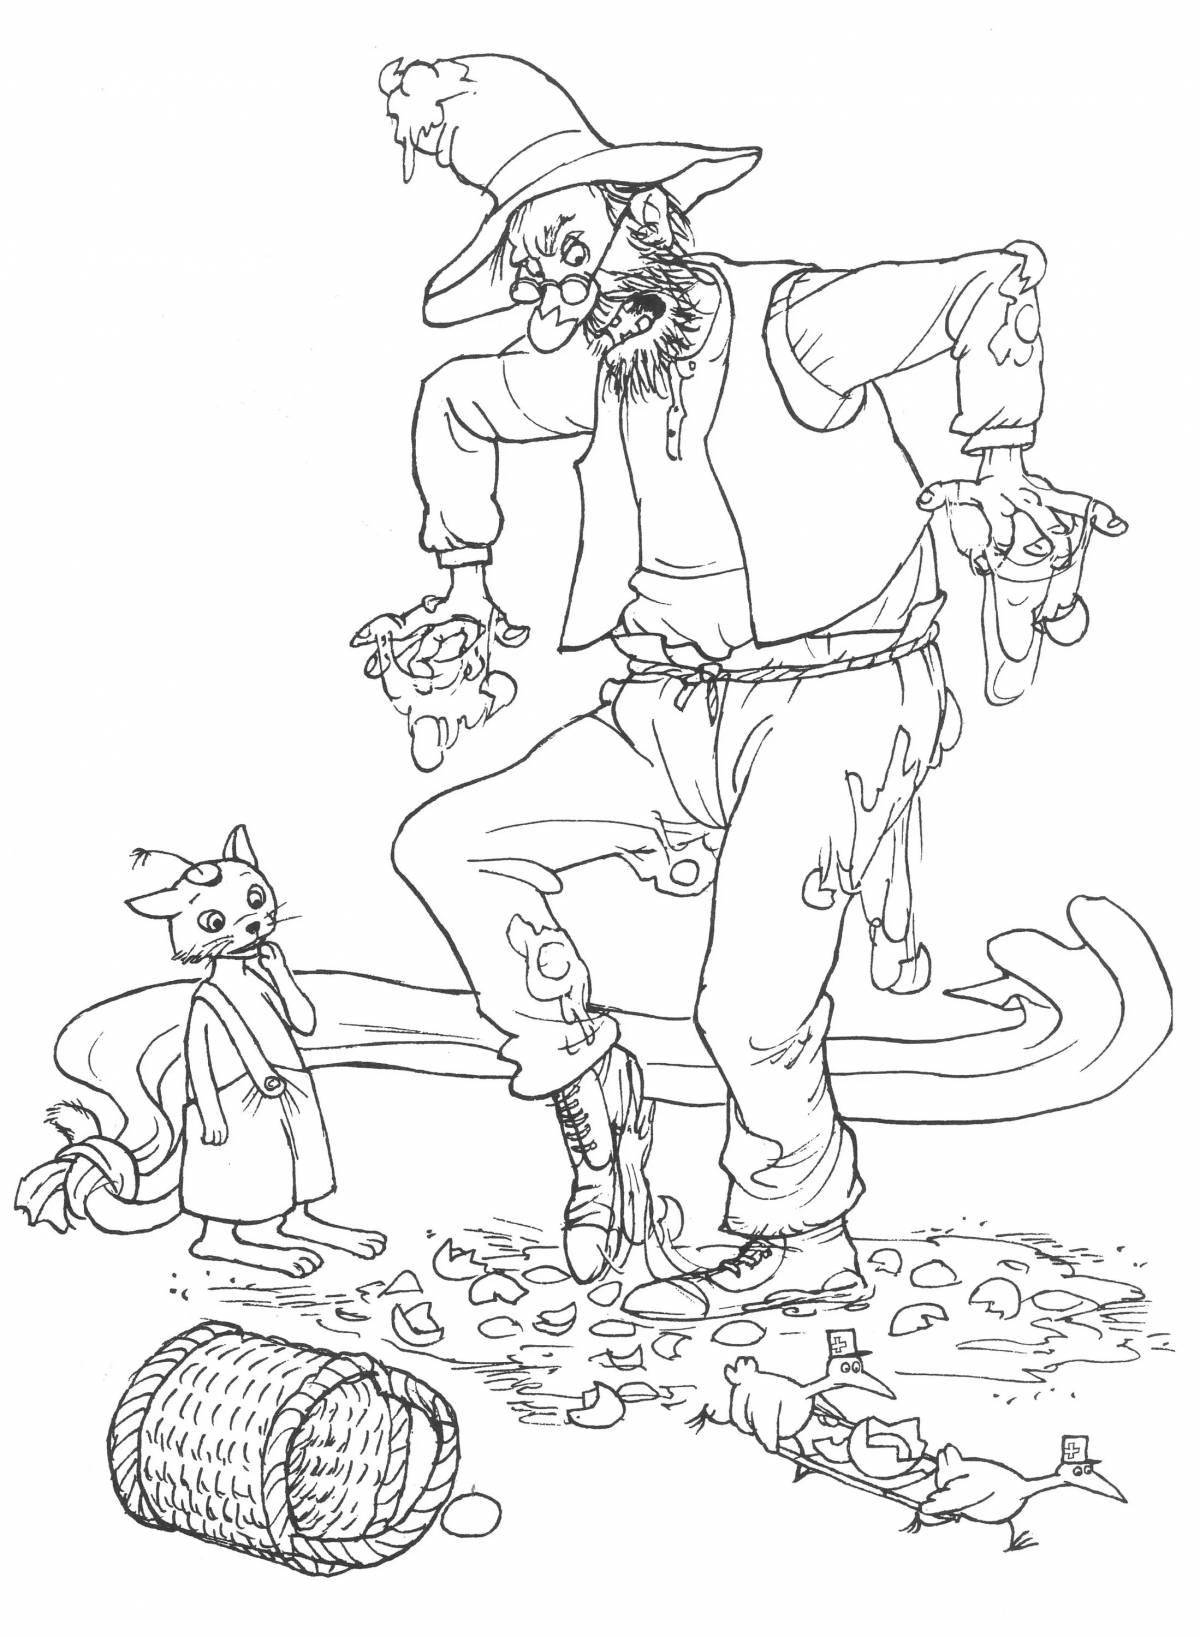 Coloring page adorable findus and petson